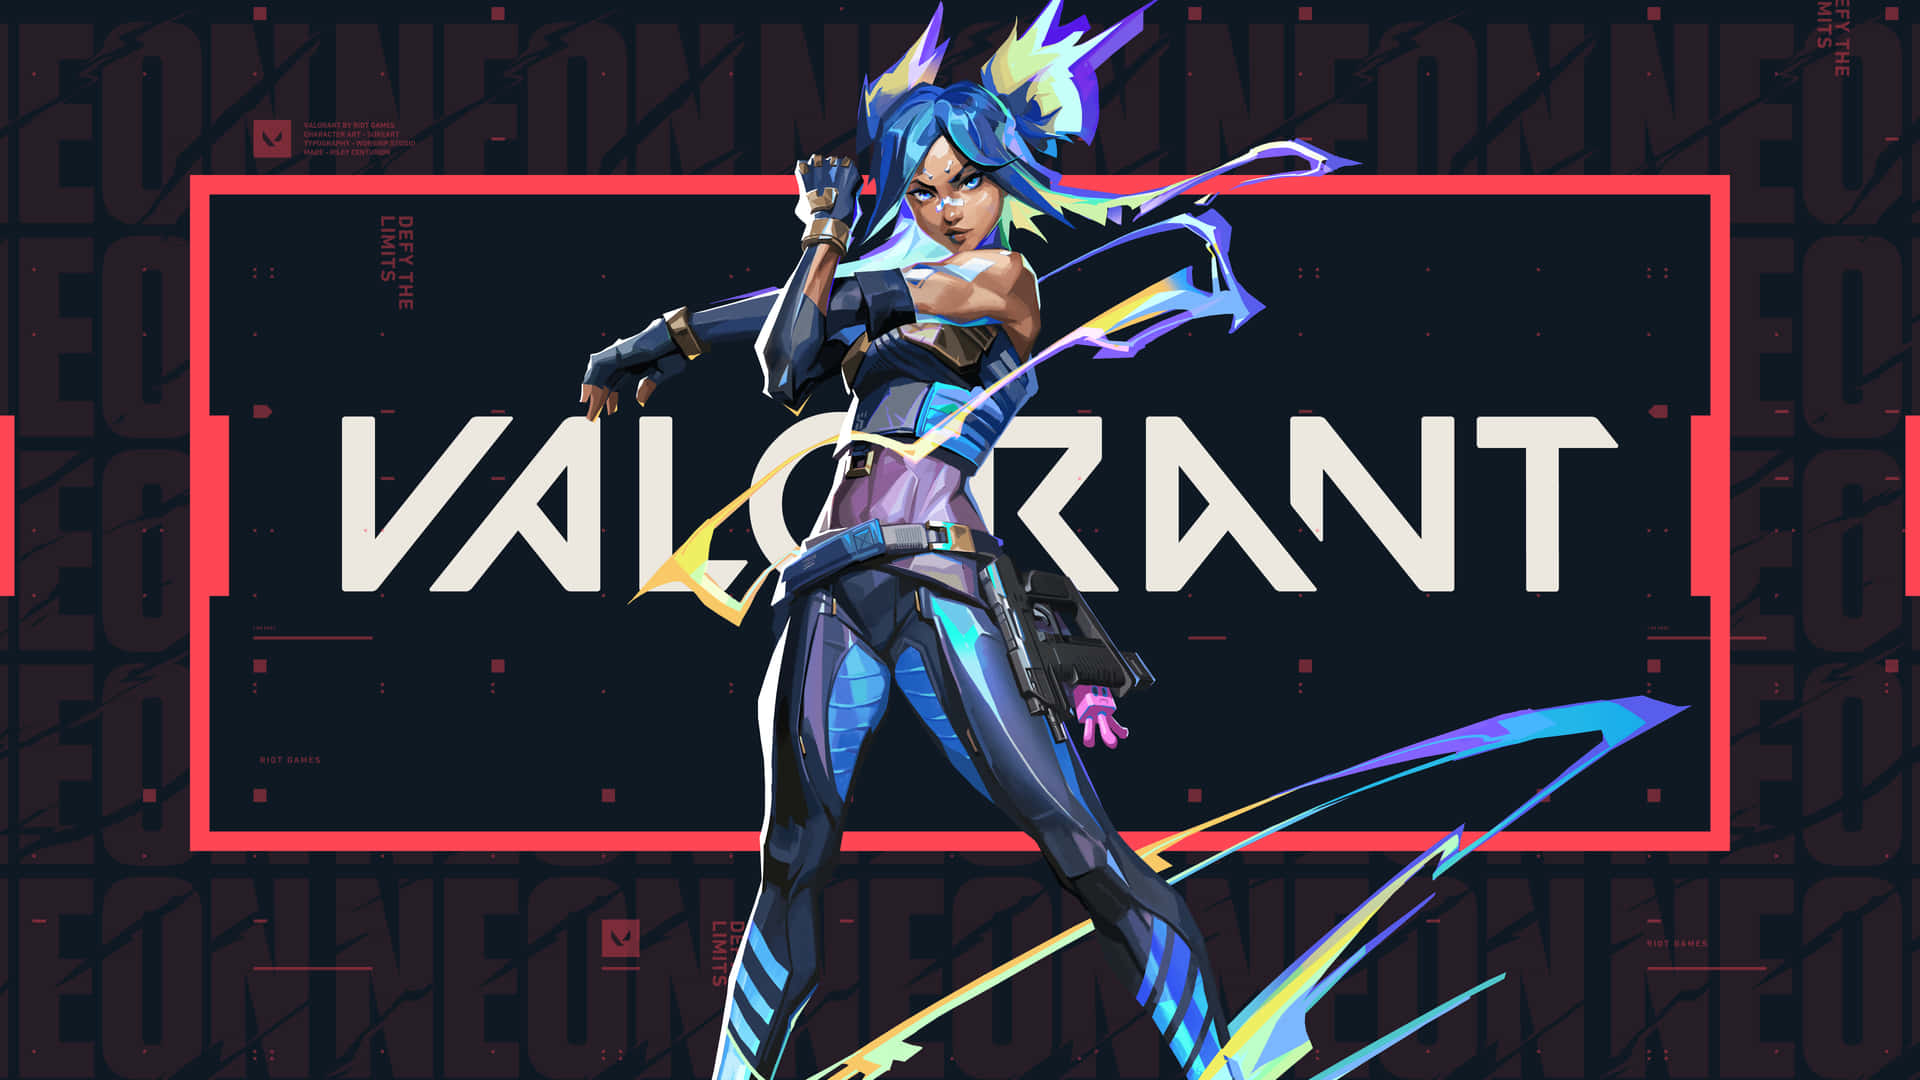 "Play your game, own the night. Play Neon Valorant!" Wallpaper